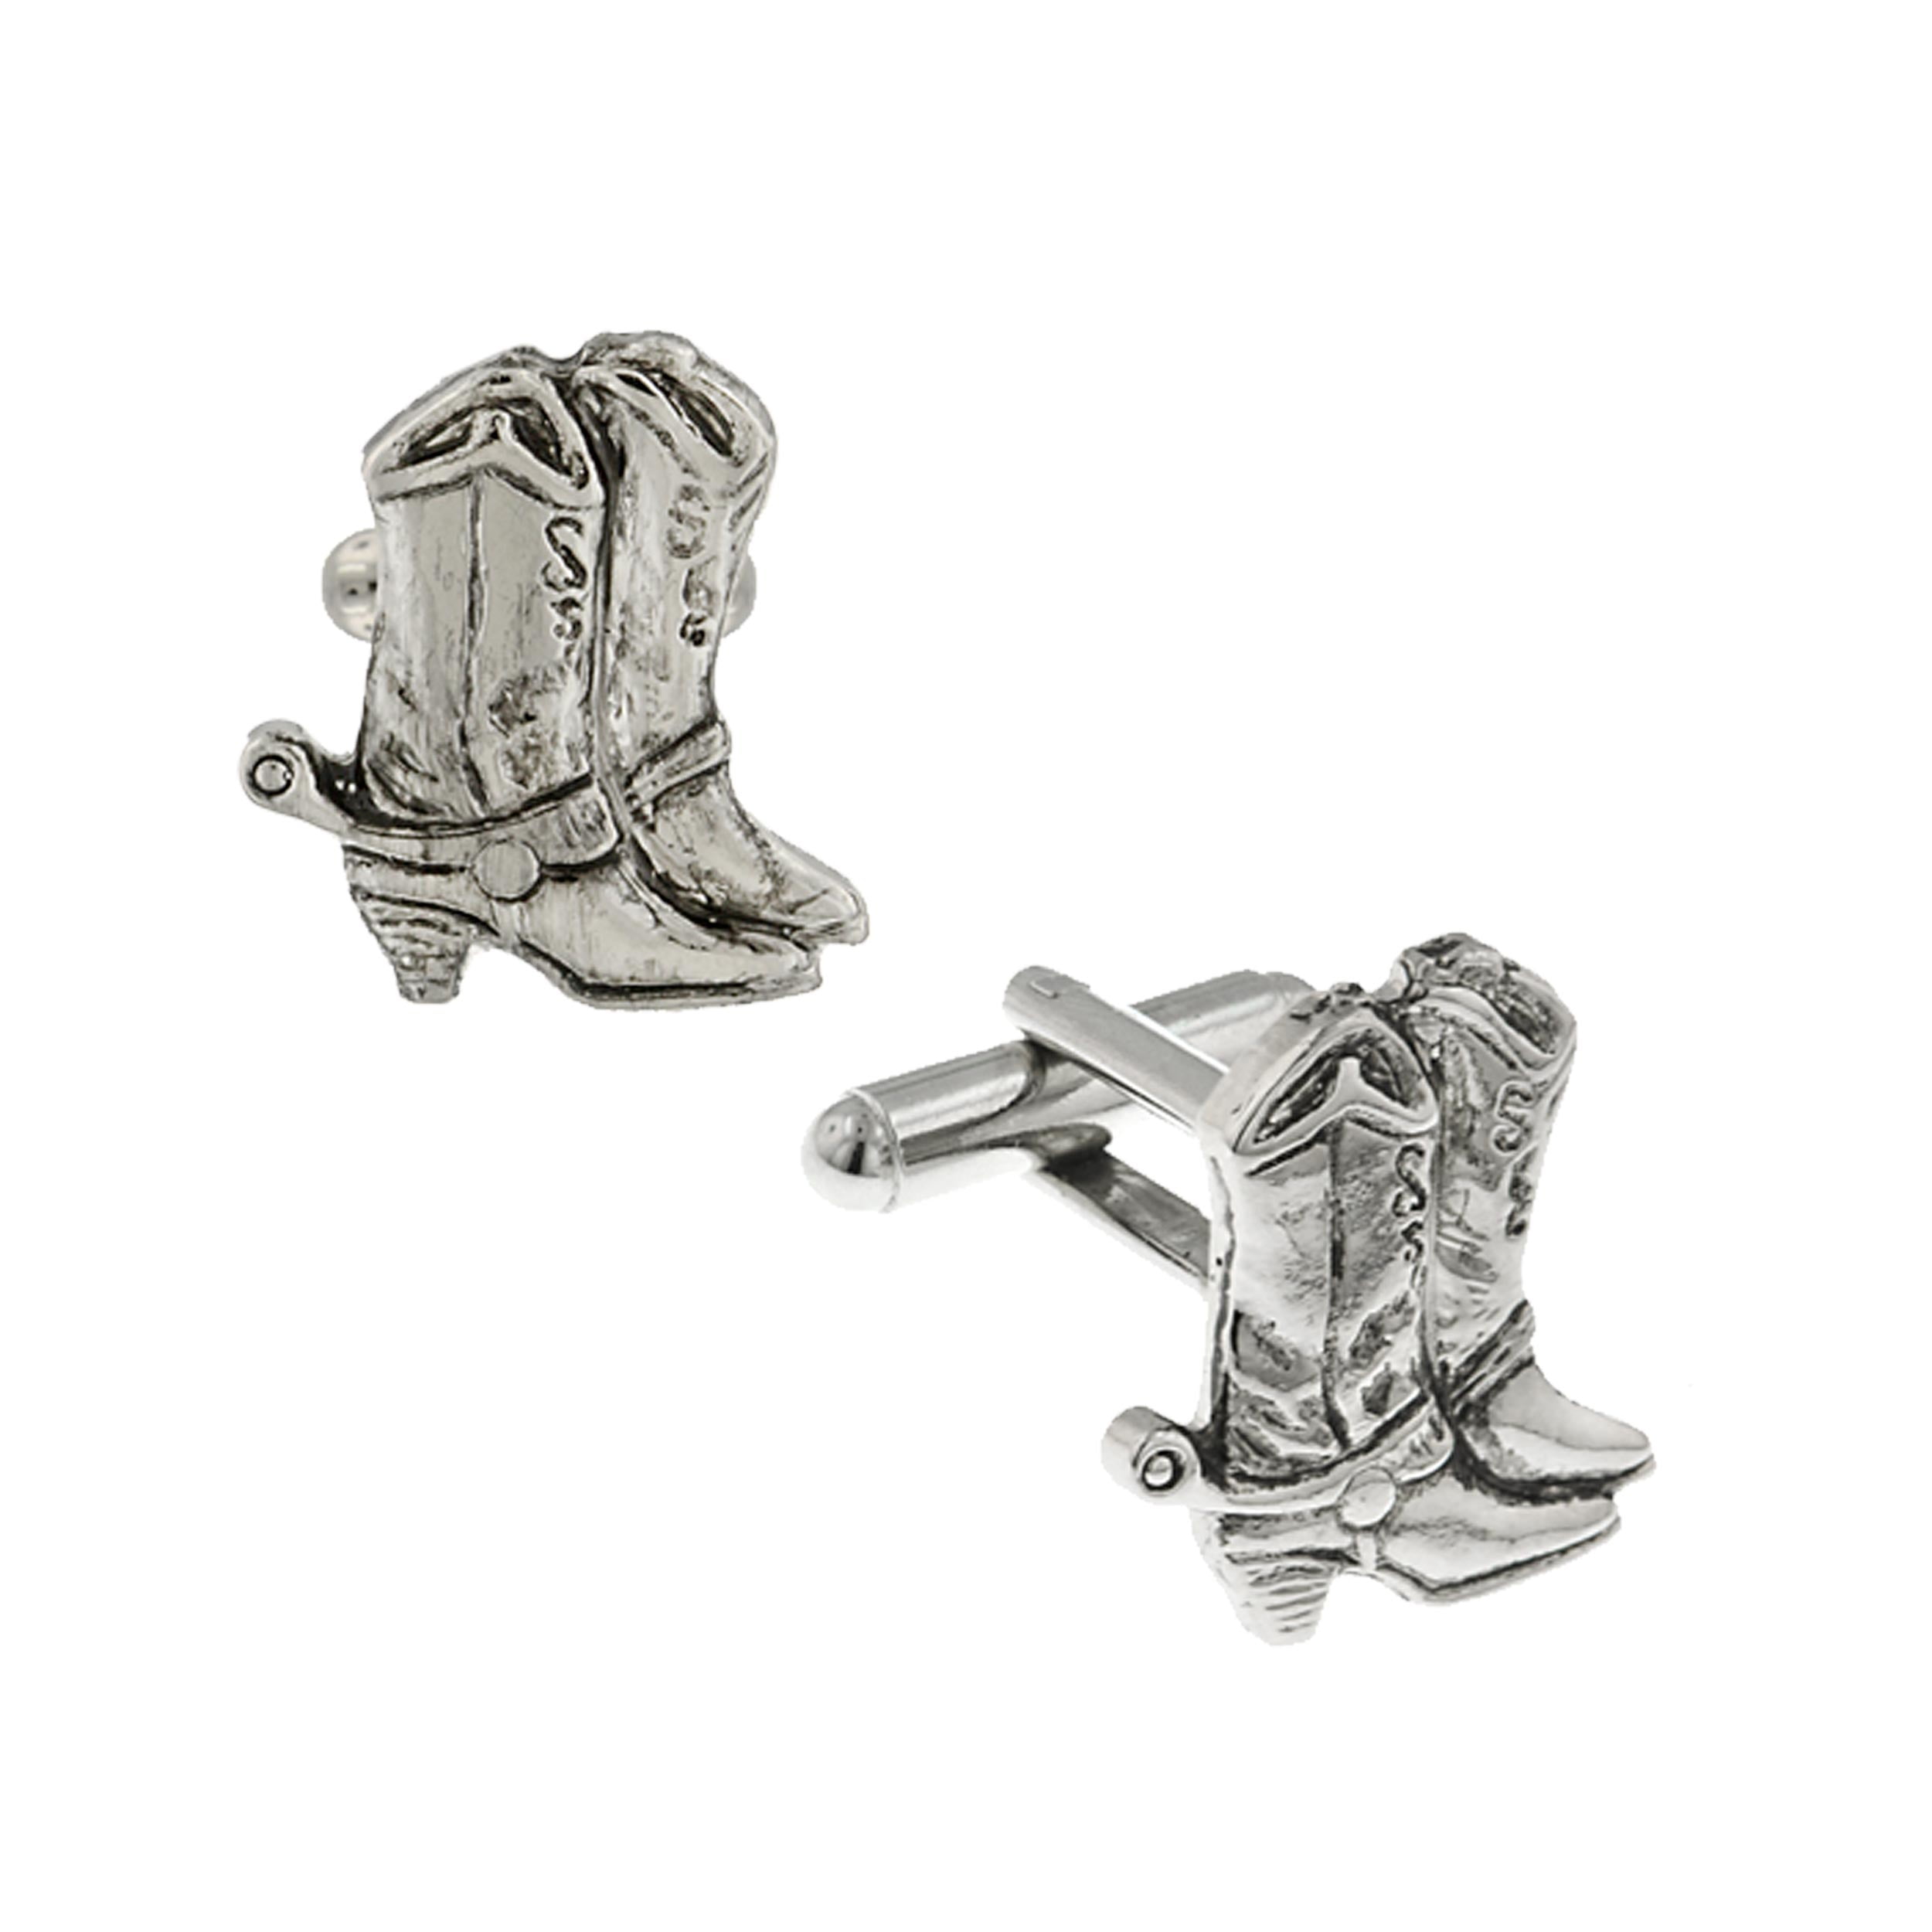 1928 Jewelry Gold-Tone Cowboy Boots Cuff Links